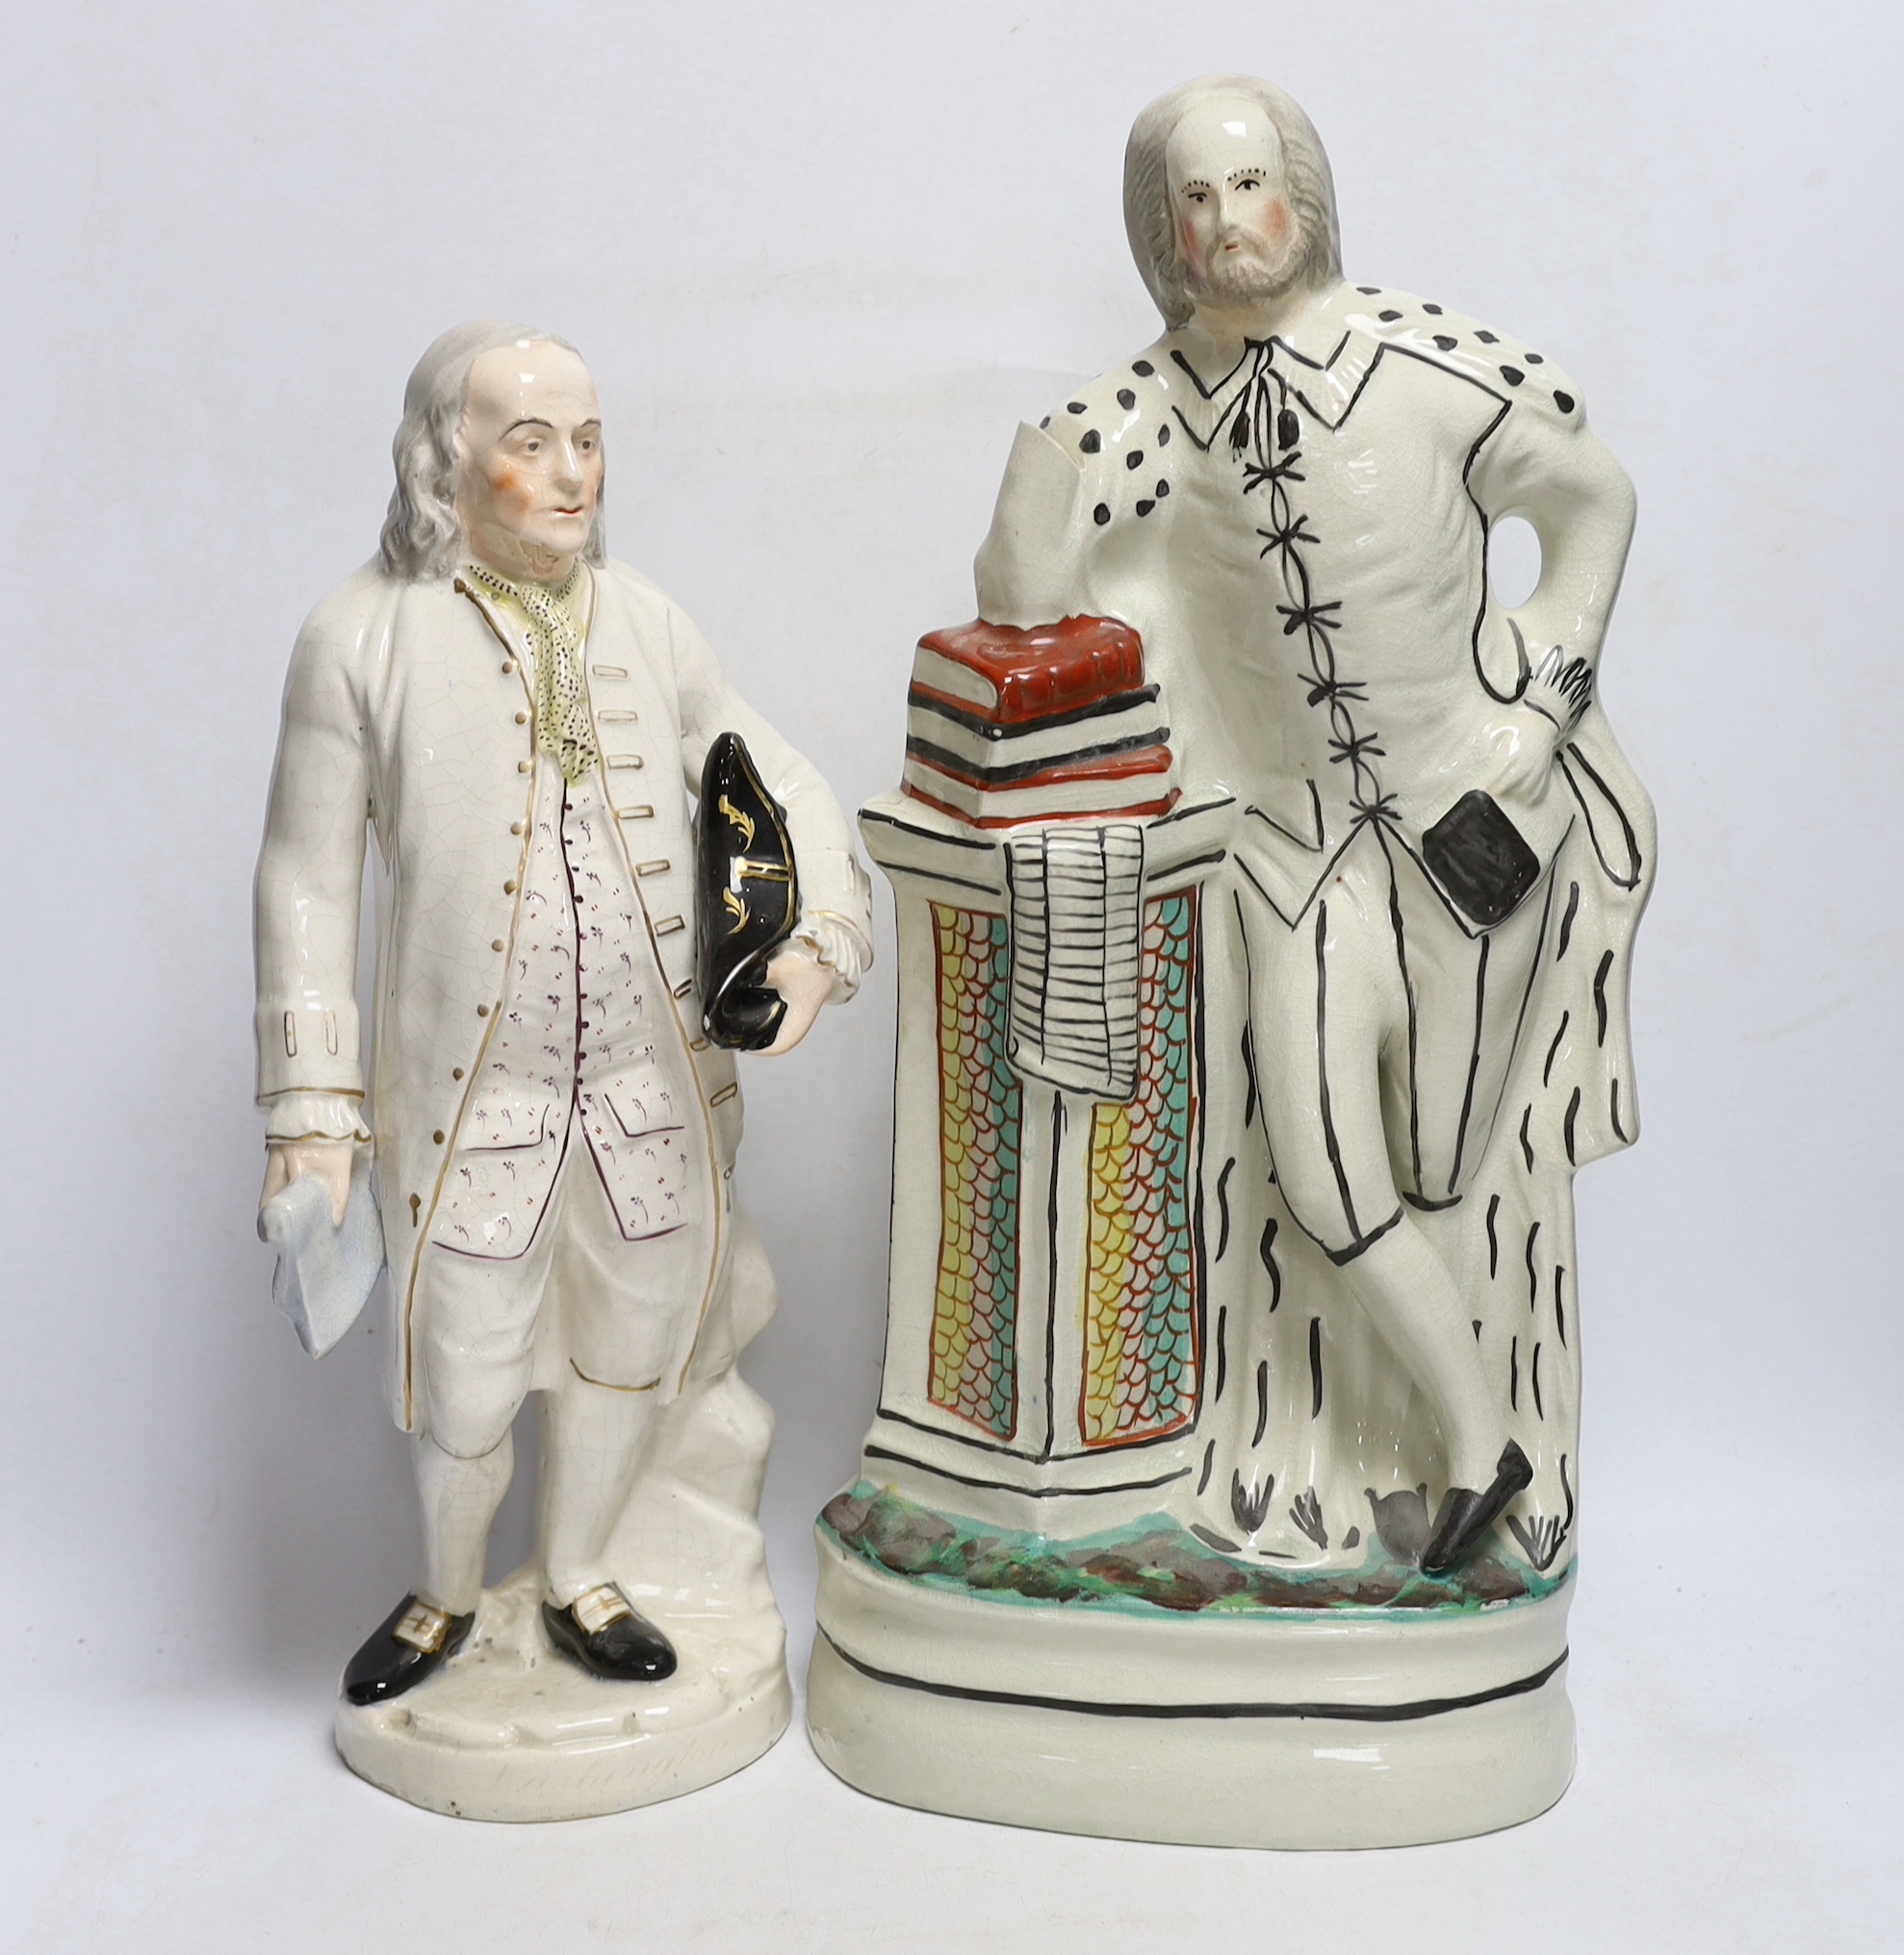 A Staffordshire pottery figure of Benjamin Franklin, modelled holding the Bill of Rights and a Staffordshire style pottery figure of William Shakespeare, tallest 46cm